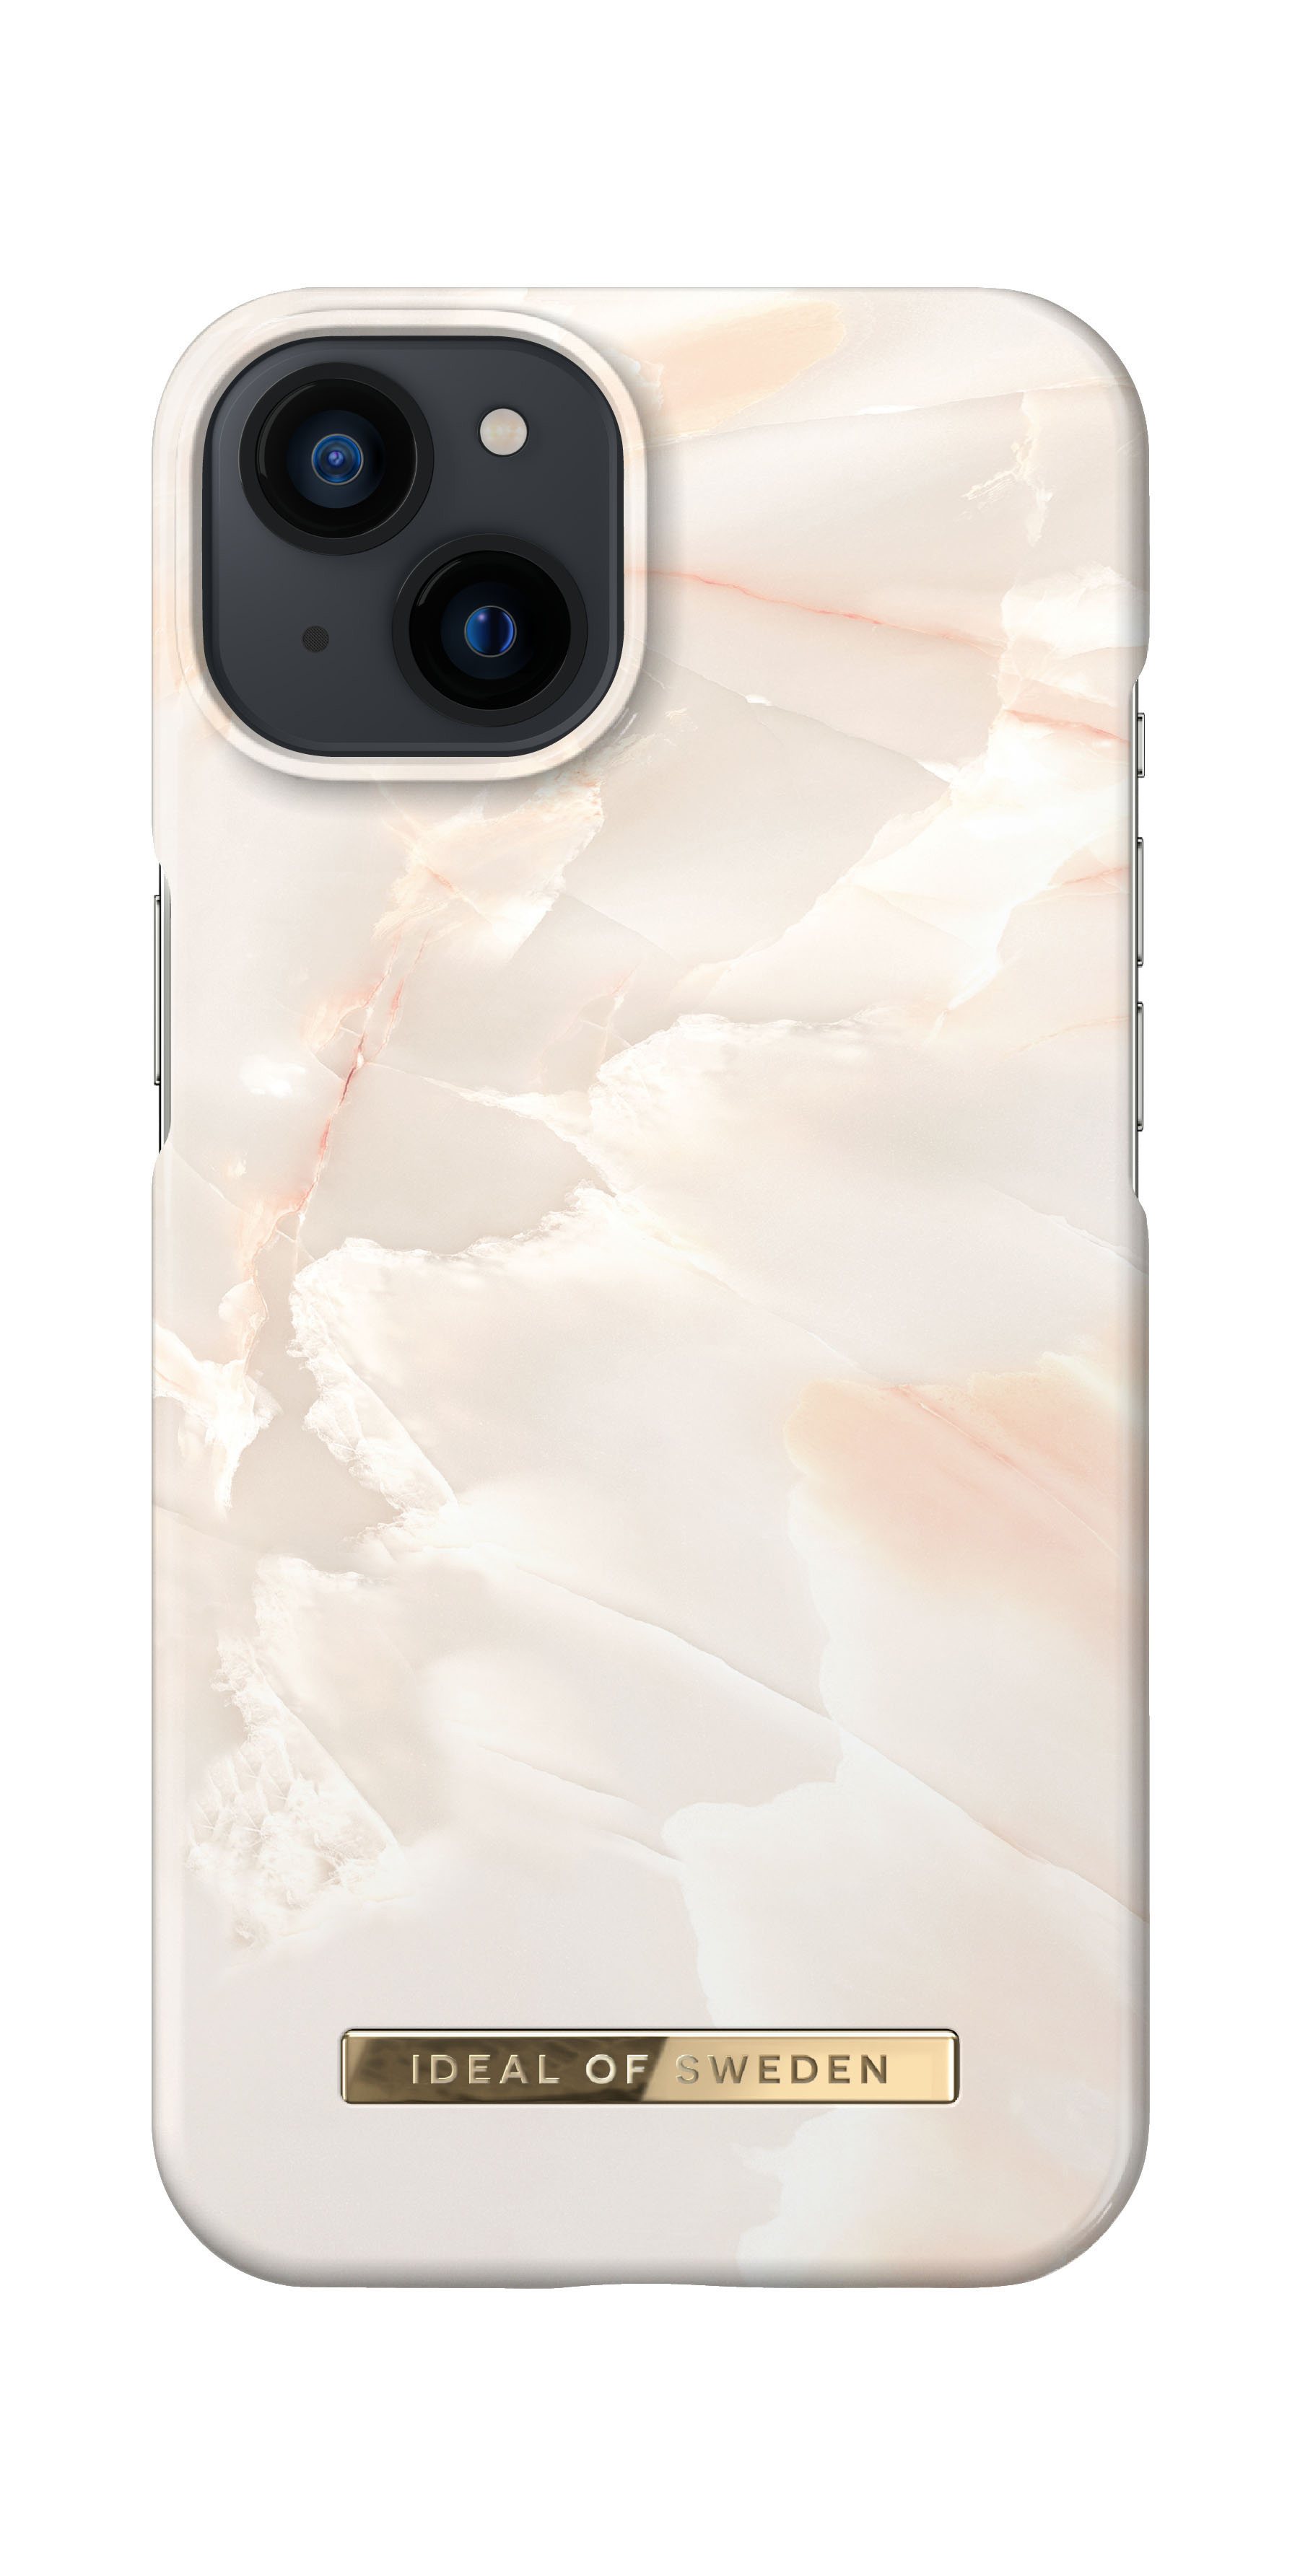 Backcover, Apple, IDEAL , OF Pearl 13 Rose SWEDEN iPhone Marble IDFCSS21-I2161-257,